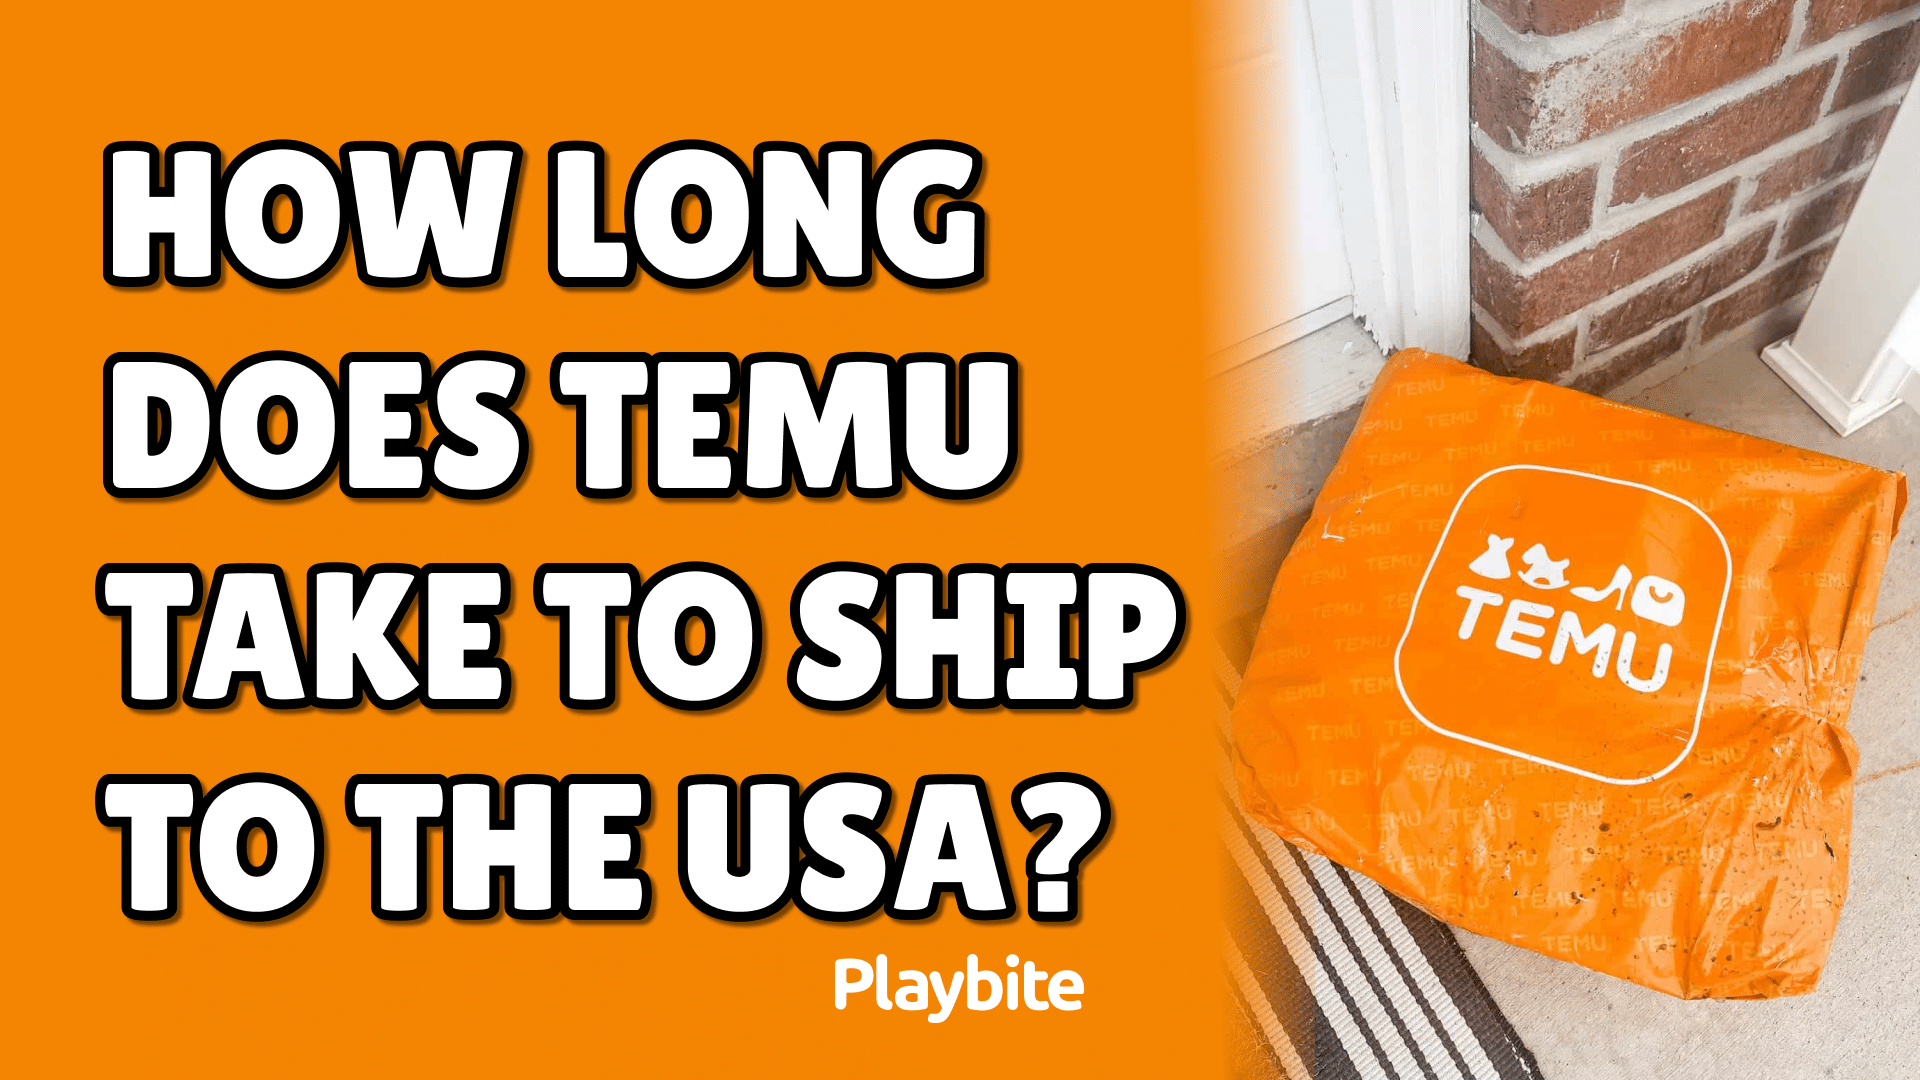 How Long Does Temu Take To Ship To The USA?